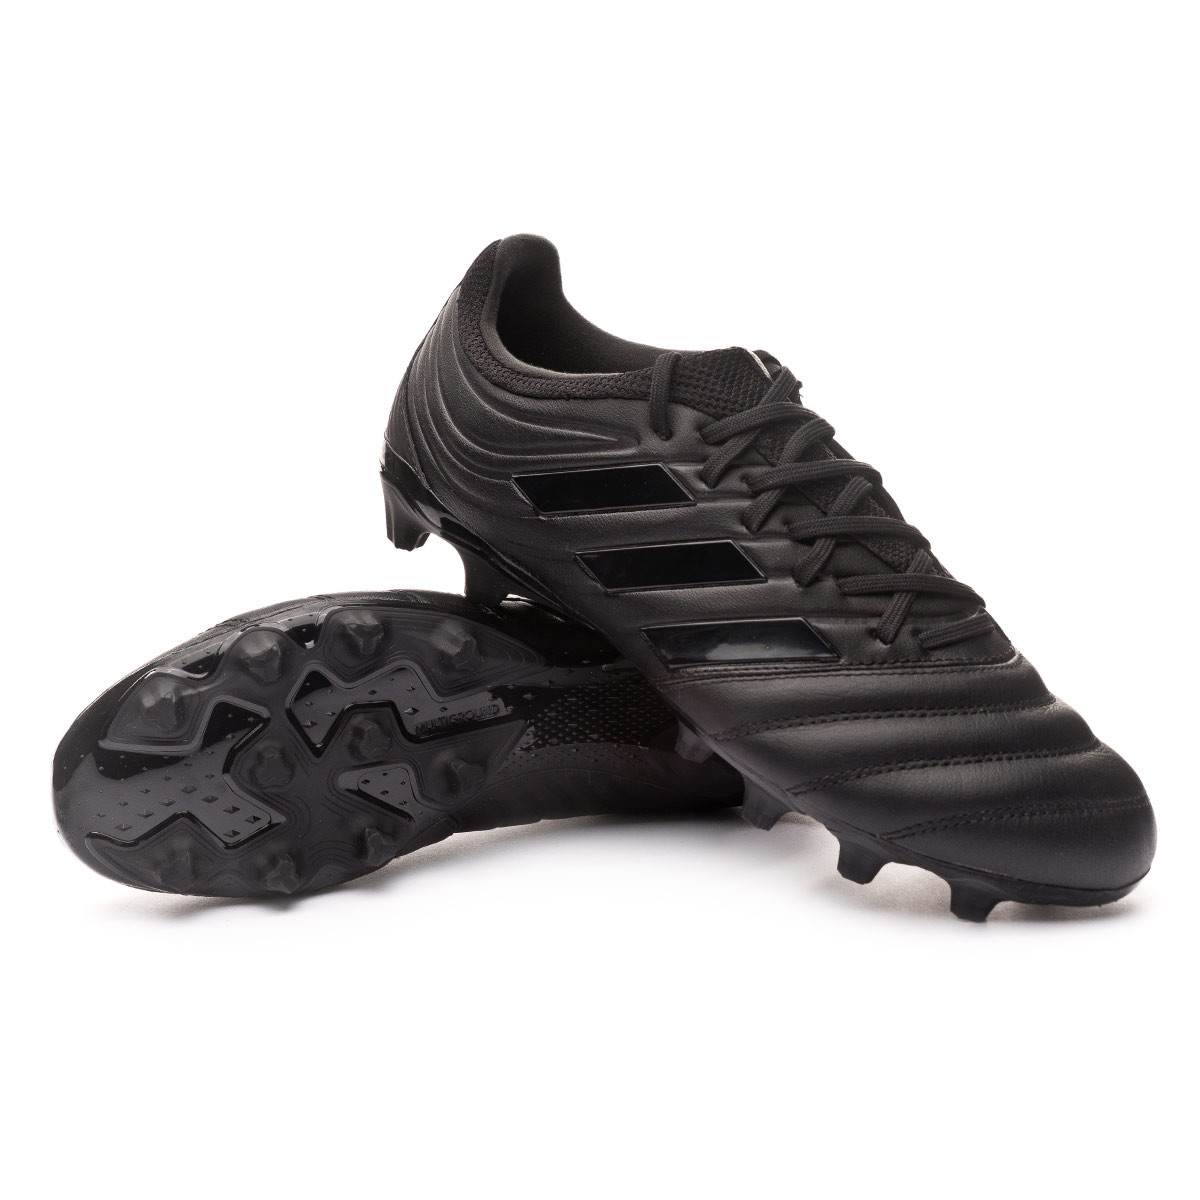 adidas copa 20.3 mg Promotions